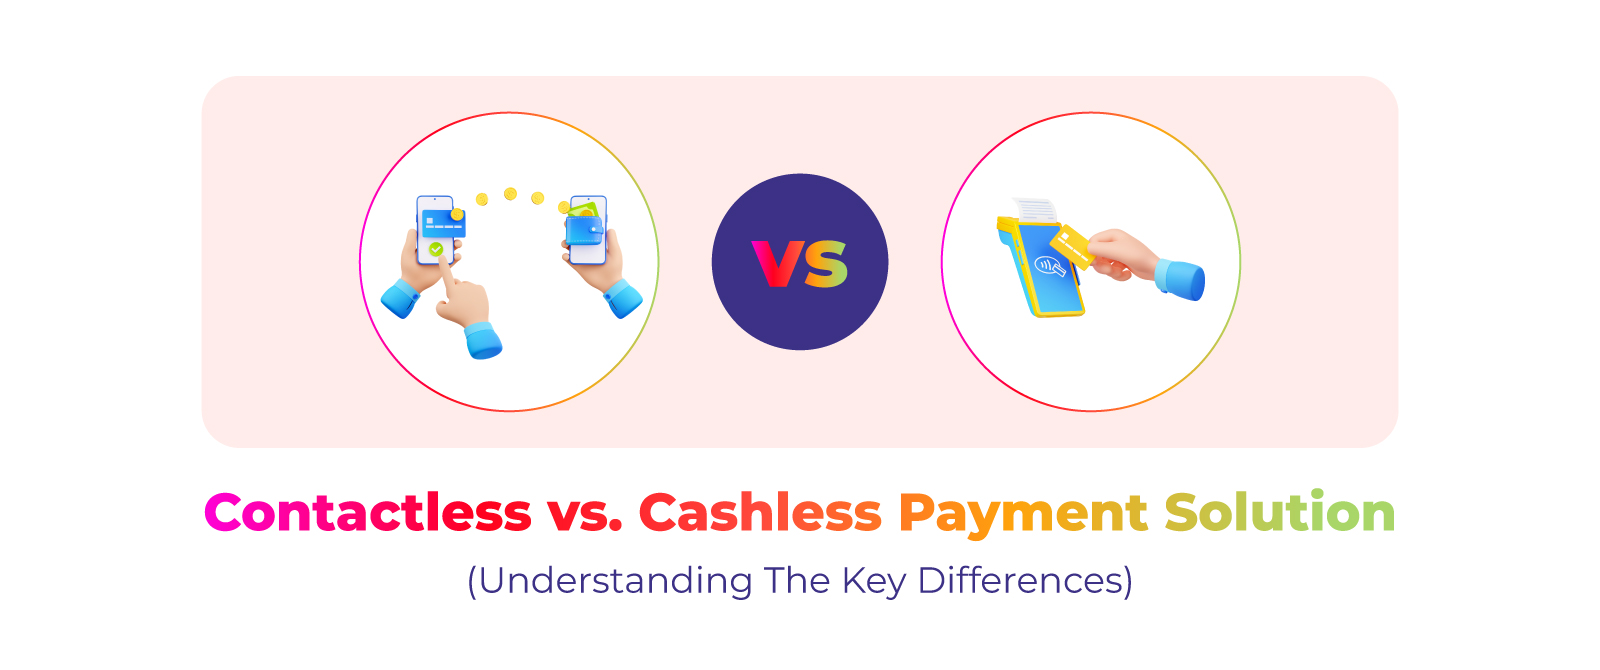 Contactless vs. Cashless Payment Solution (Understanding the Key Differences)